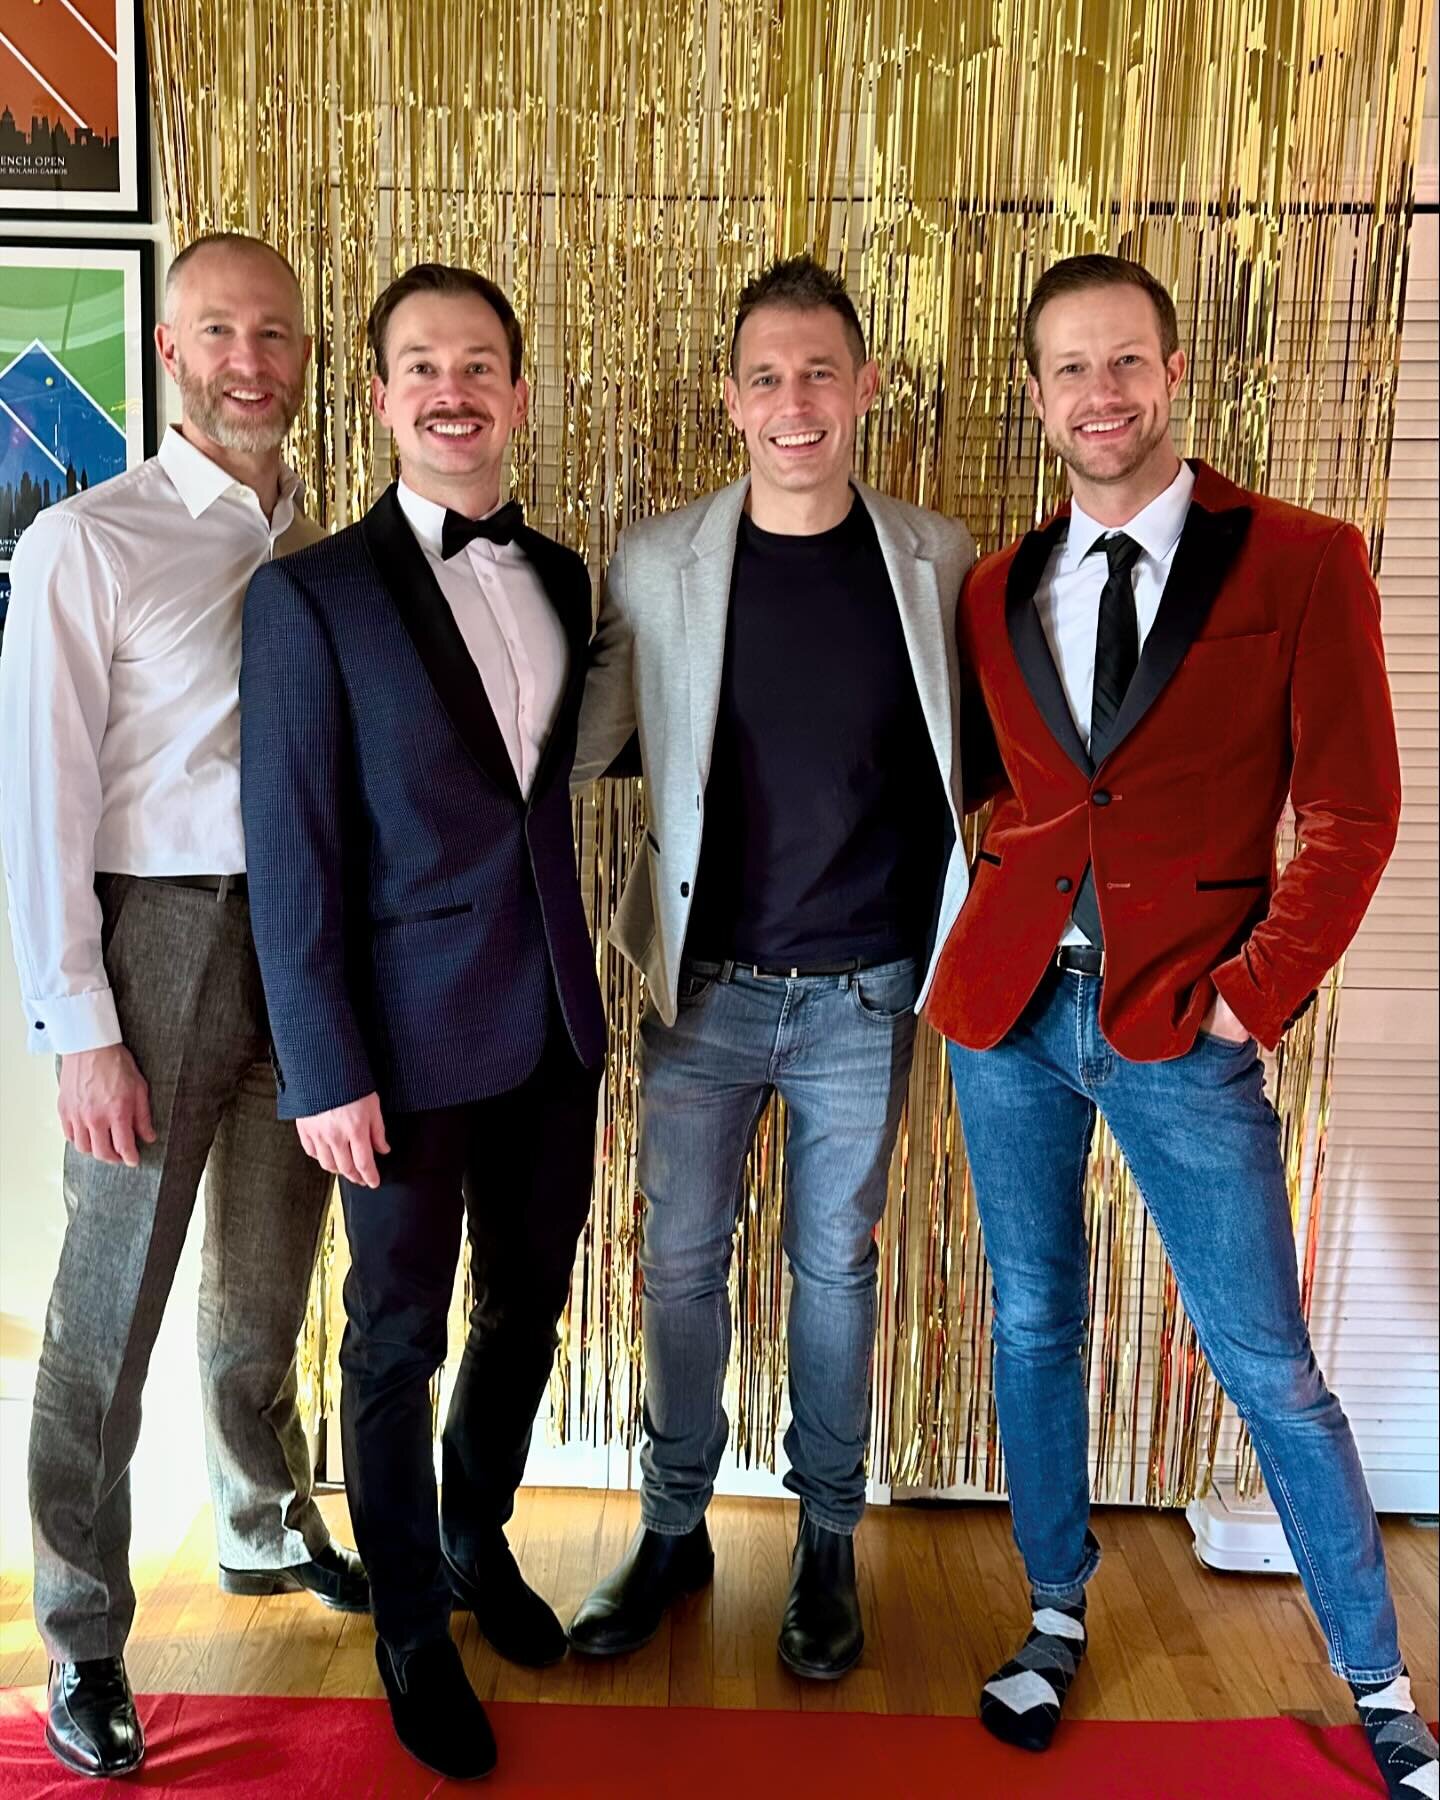 Smelts trade in their gold medals for gold statues at our annual Oscars party 🏊&zwj;♂️🎬

#SplashAndWatch #oscars #chatgpt #swimteam 
#anhonorjusttobenominated #redcarpet #gagworthy #fashion #swim #serving #lgbtq🌈 #swimming🏊 #swimlife #gaysports #